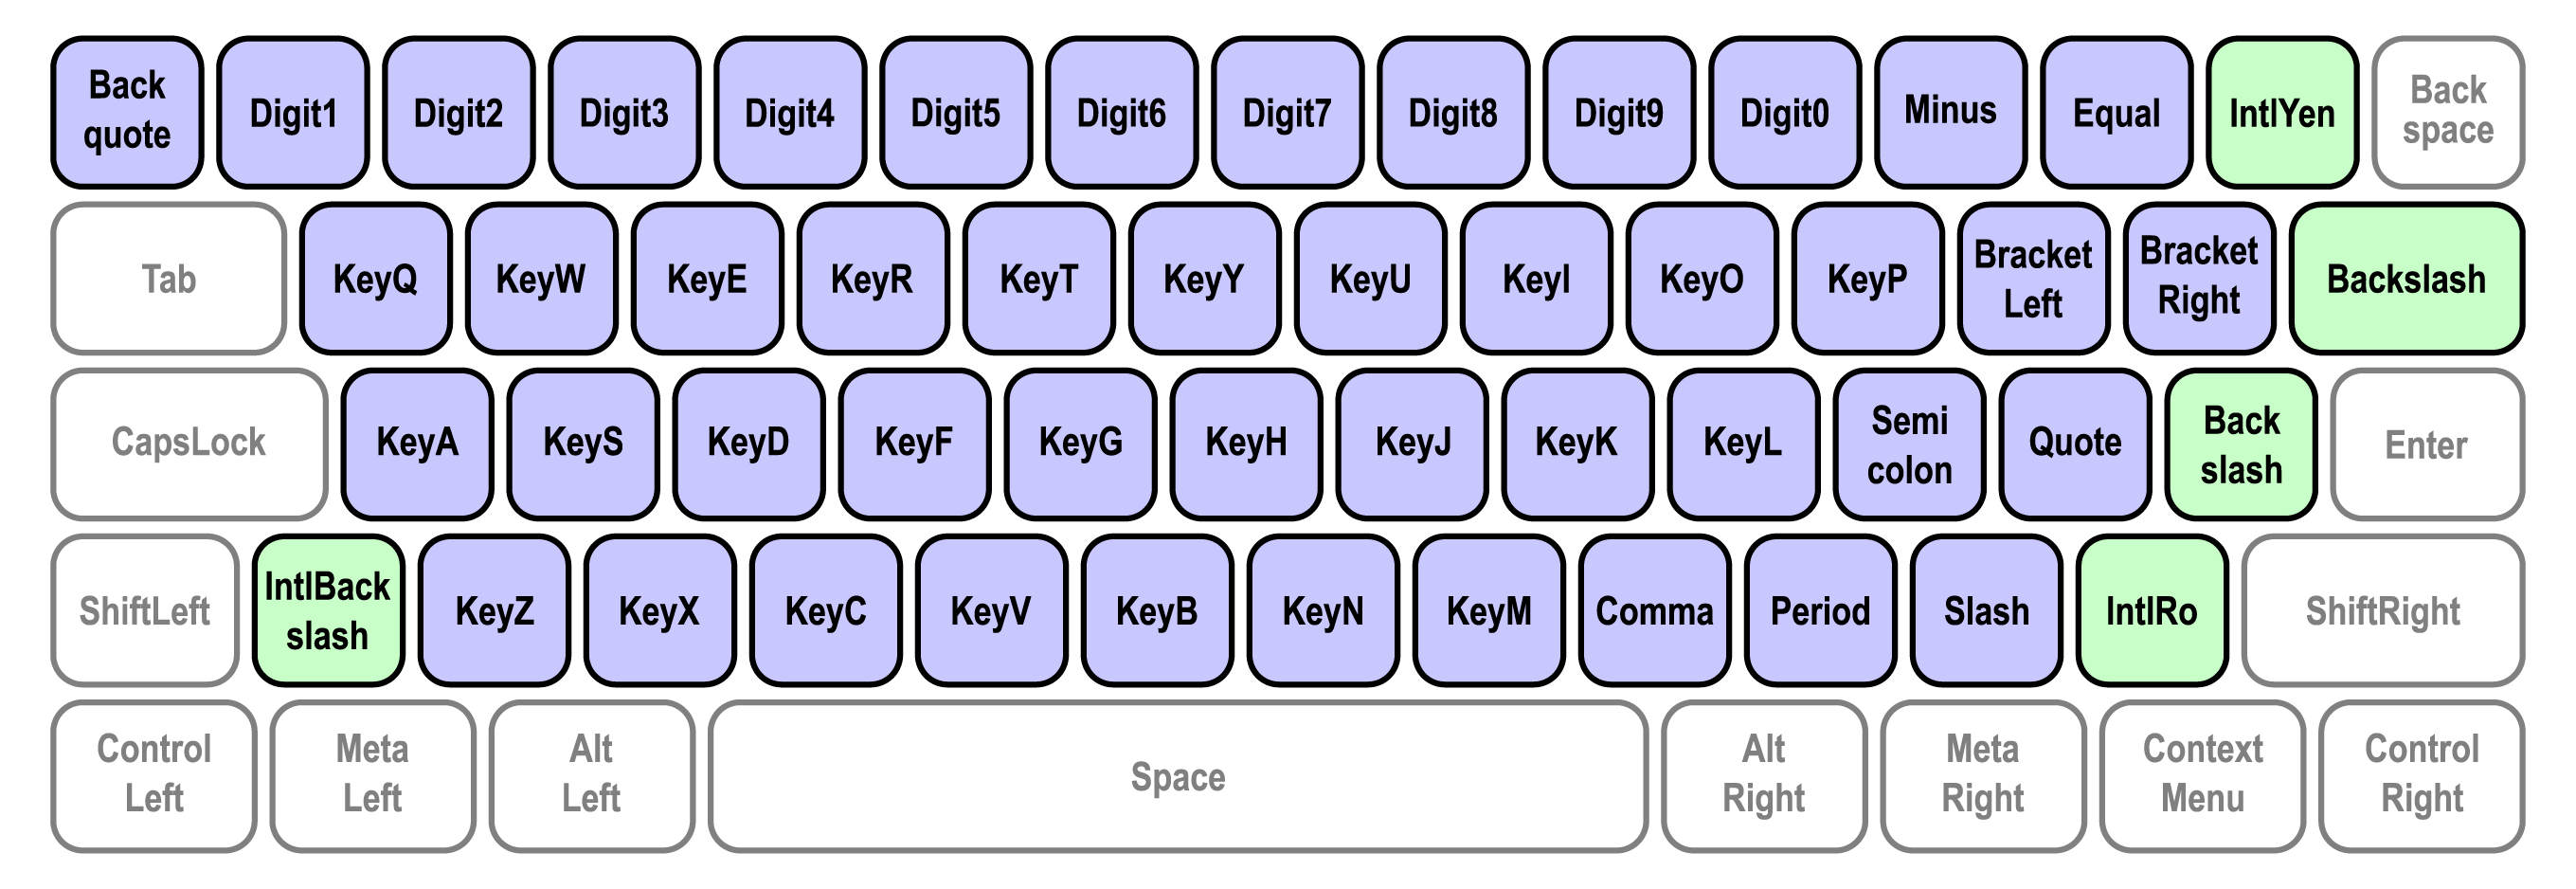 Writing system keys as defined by the UI Events KeyboardEvent code Values spec.